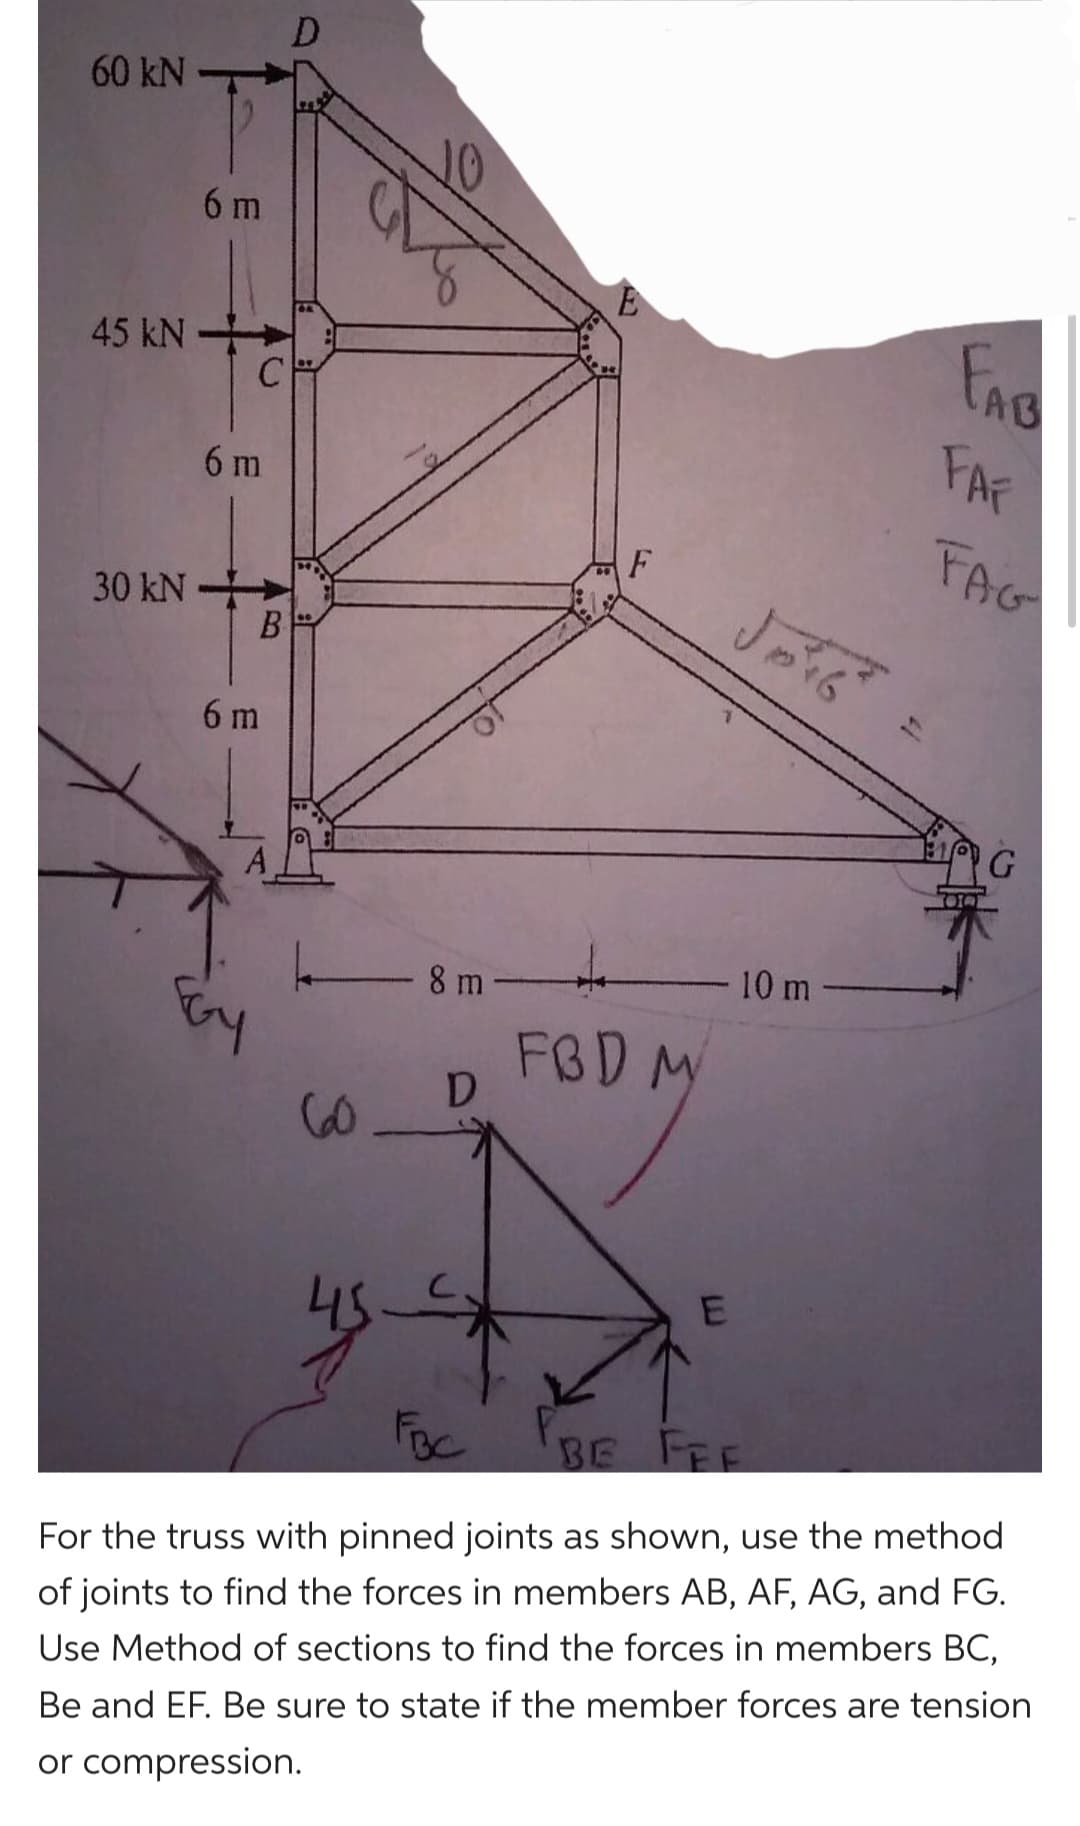 60 kN
45 KN
6 m
C
6 m
30 kN-
B
6 m
D
60
20
8 m-
D
E
F
FBD M
E
Joi6
10 m
FAB
FAF
FAG
G
FBC
BE FEE
For the truss with pinned joints as shown, use the method
of joints to find the forces in members AB, AF, AG, and FG.
Use Method of sections to find the forces in members BC,
Be and EF. Be sure to state if the member forces are tension
or compression.